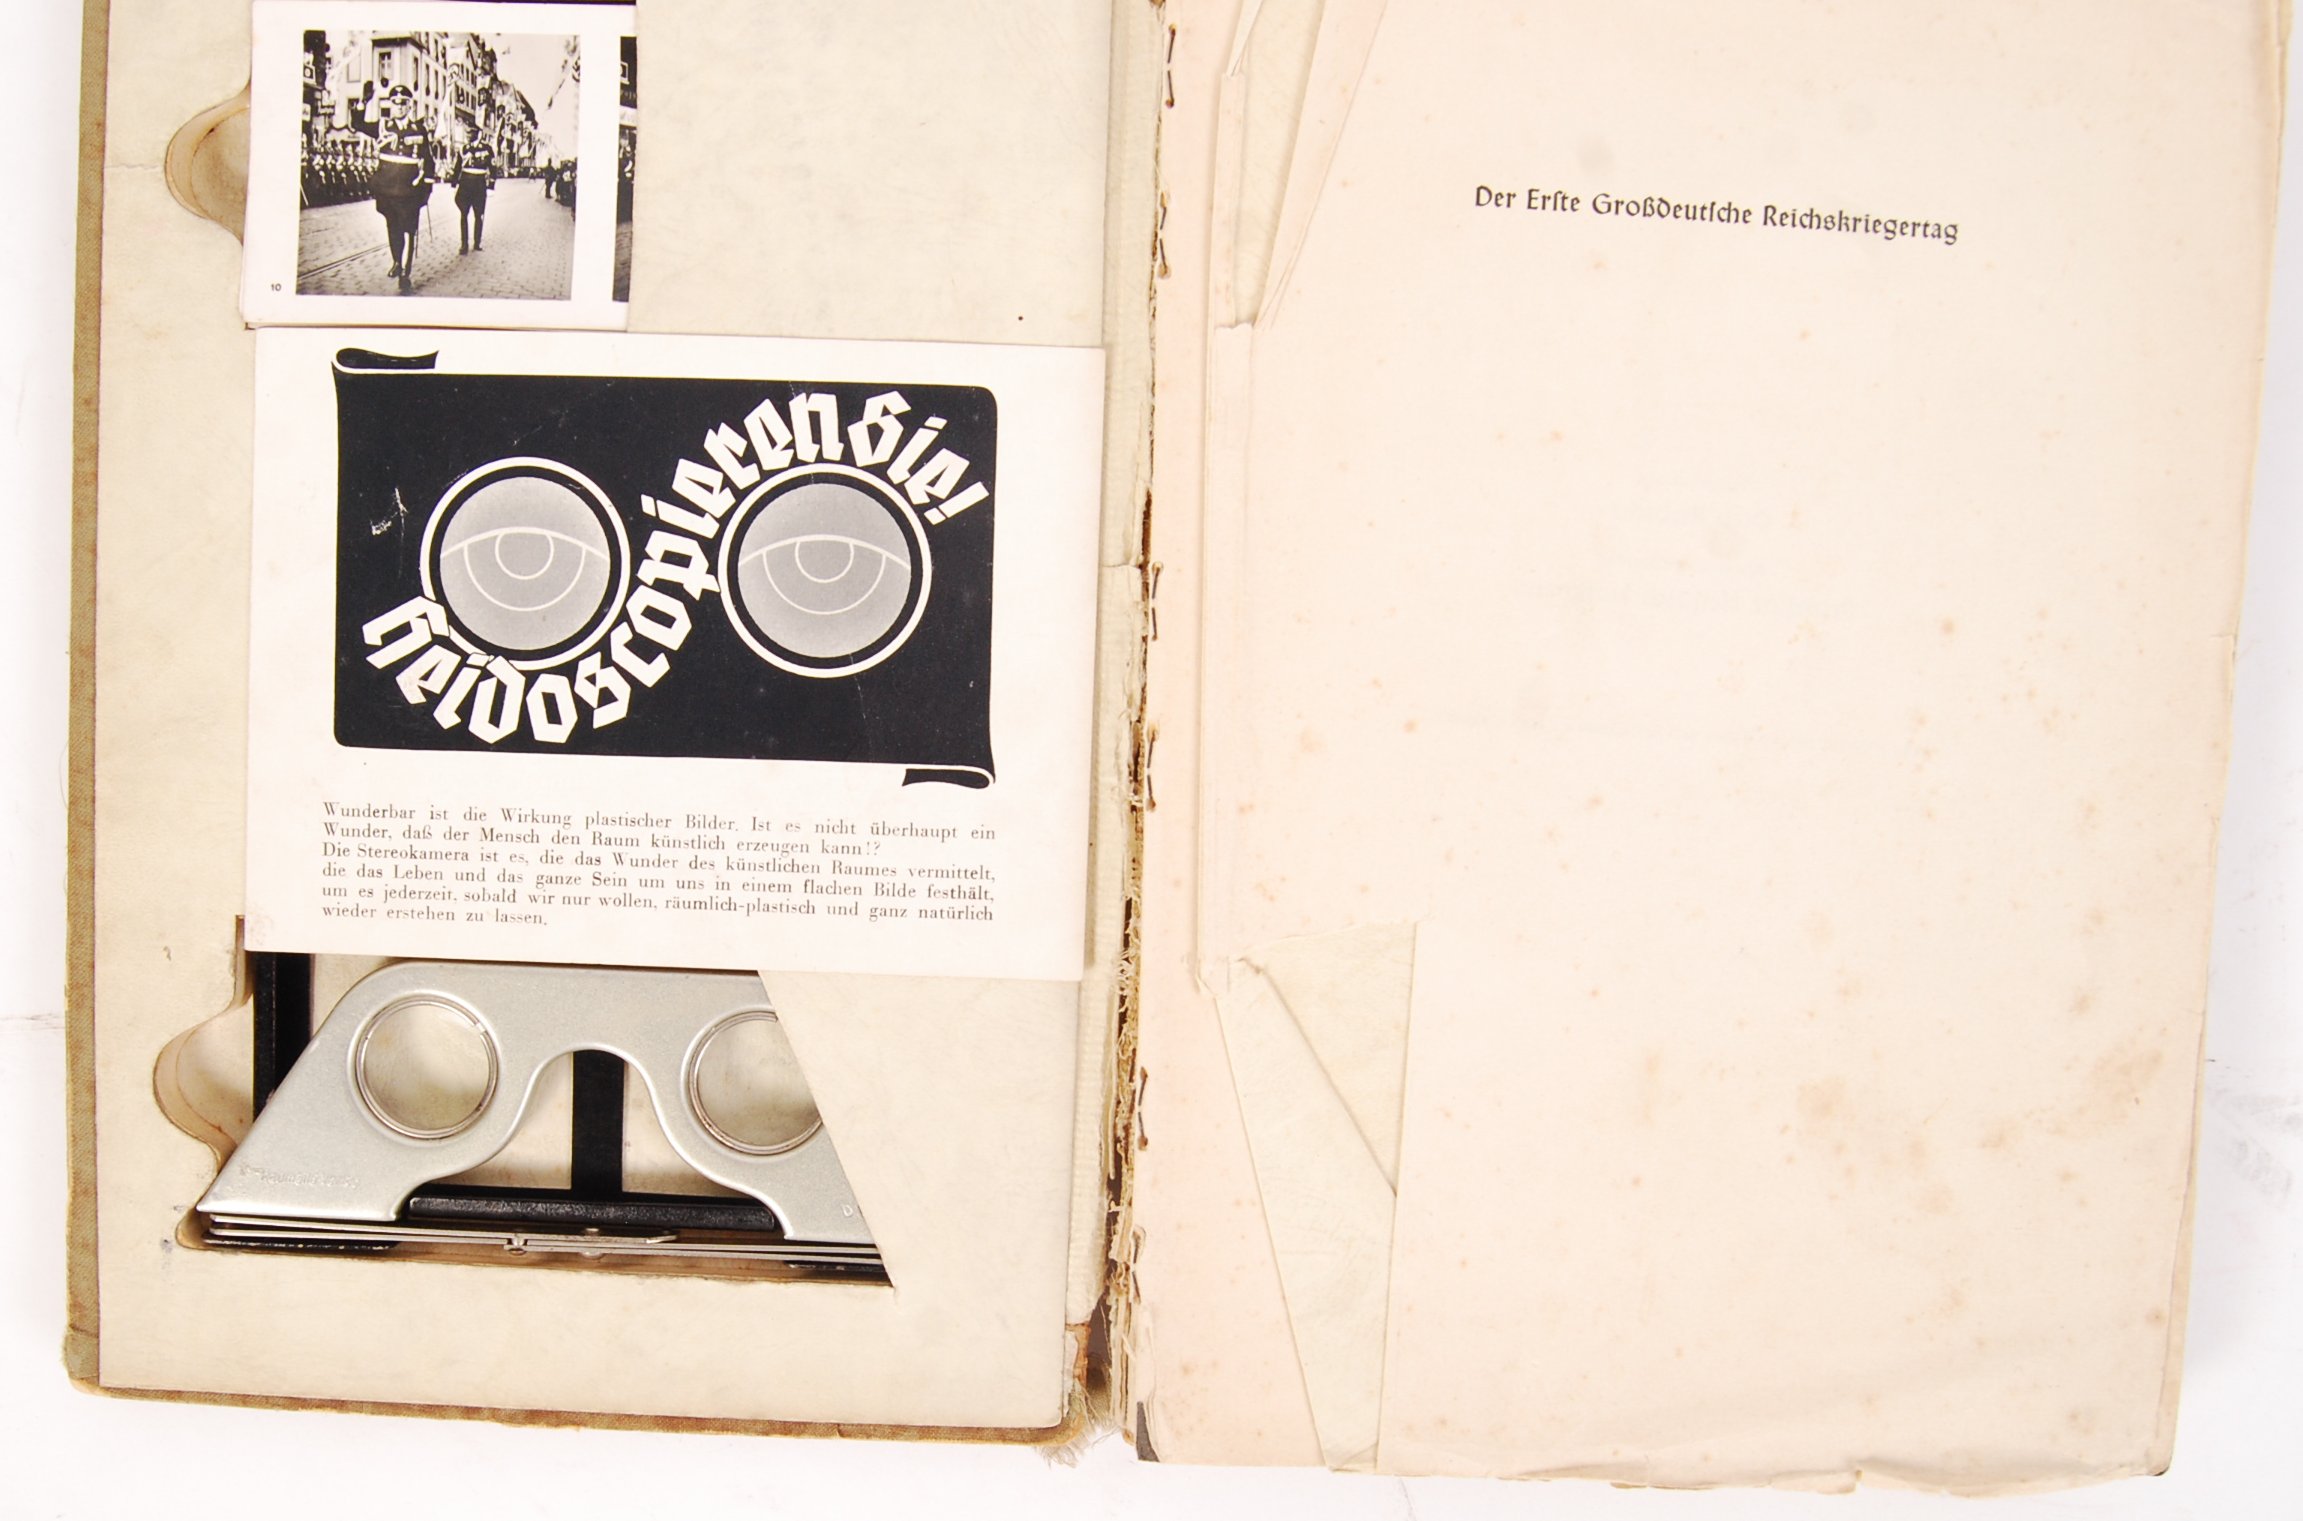 PRE-WWII SECOND WORLD WAR GERMAN STEREOSCOPIC VIEWER & BOOK - Image 2 of 3